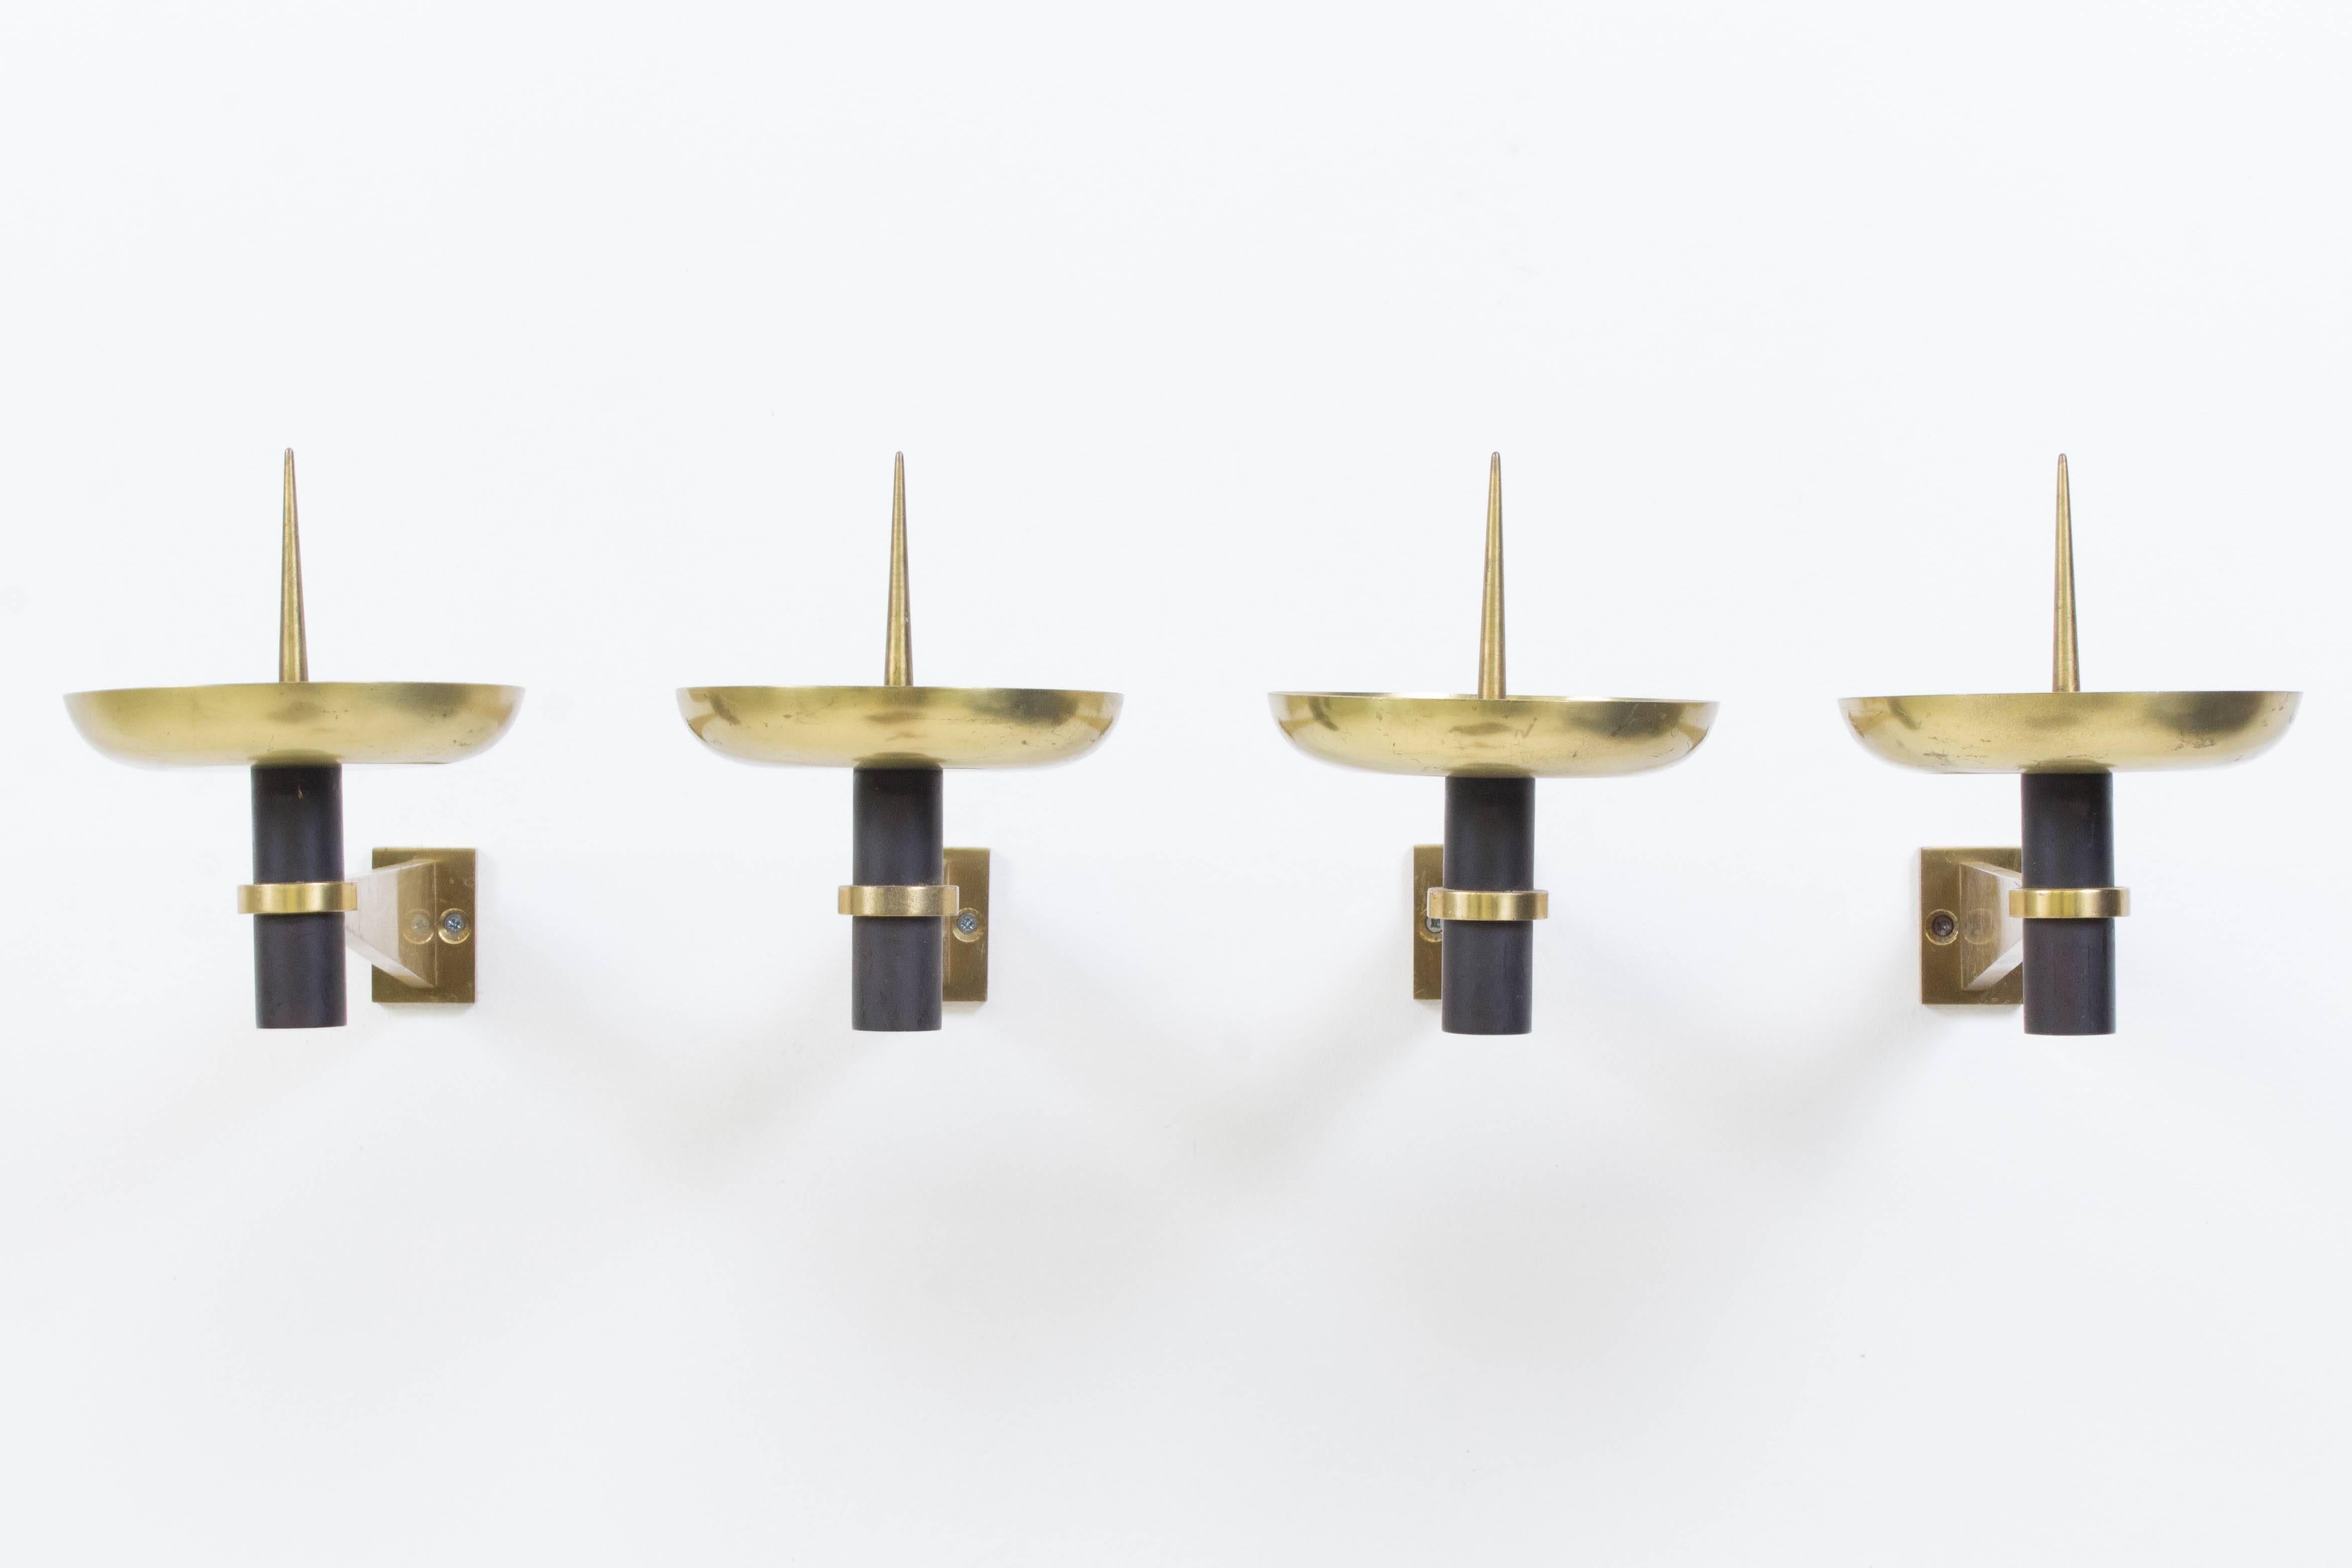 Lacquered Rare Set of Four French Mid-Century Modern Wall Candle Sconces, 1950s